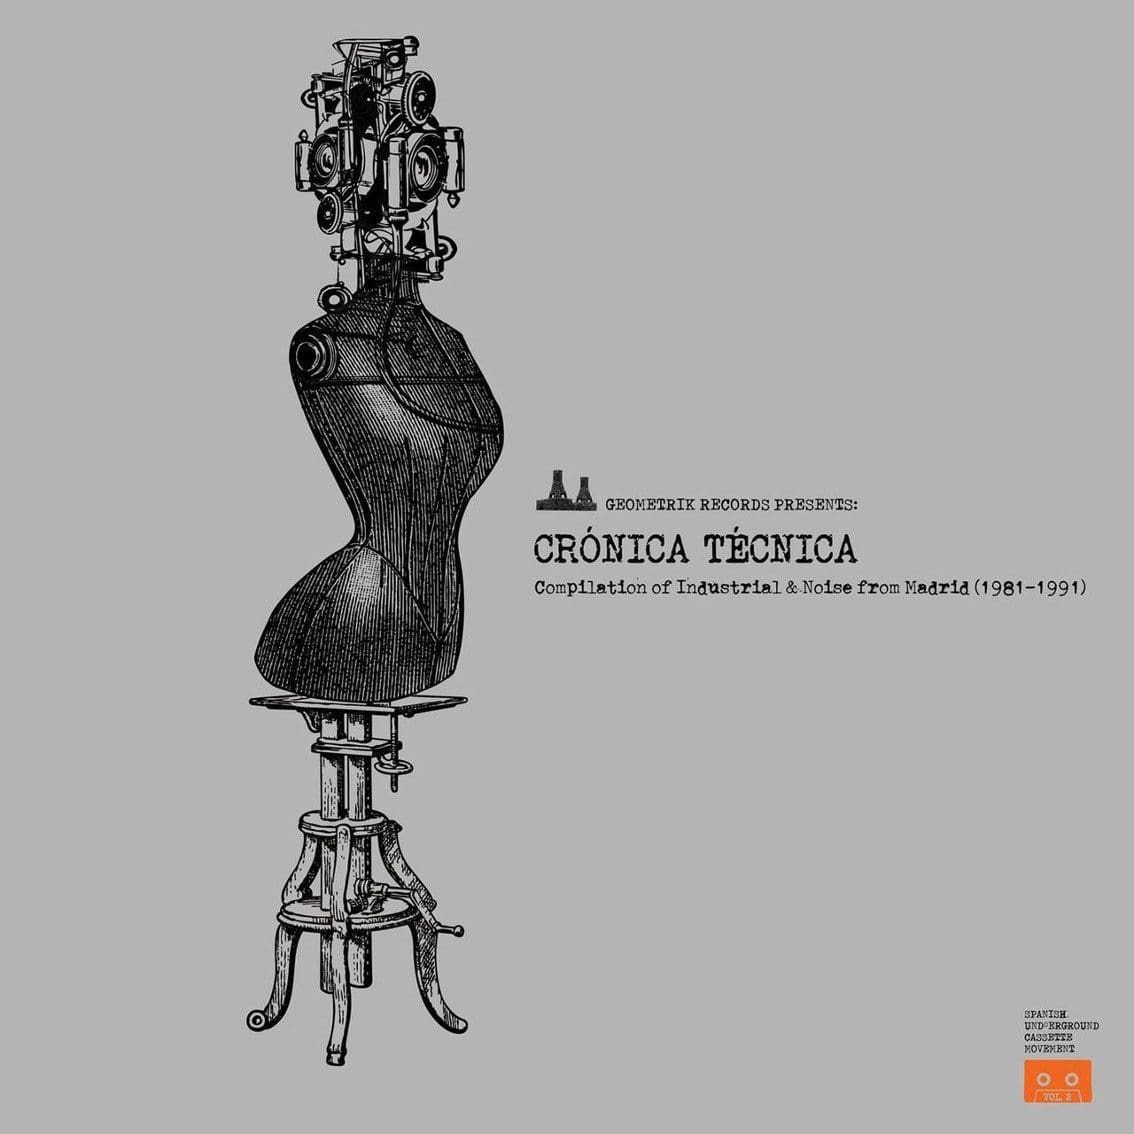 Spanish electronic scene from the eighties compiled on'Cronica Tecnica: compilation of industrial and noise from Madrid 1981-1991' 2LP vinyl